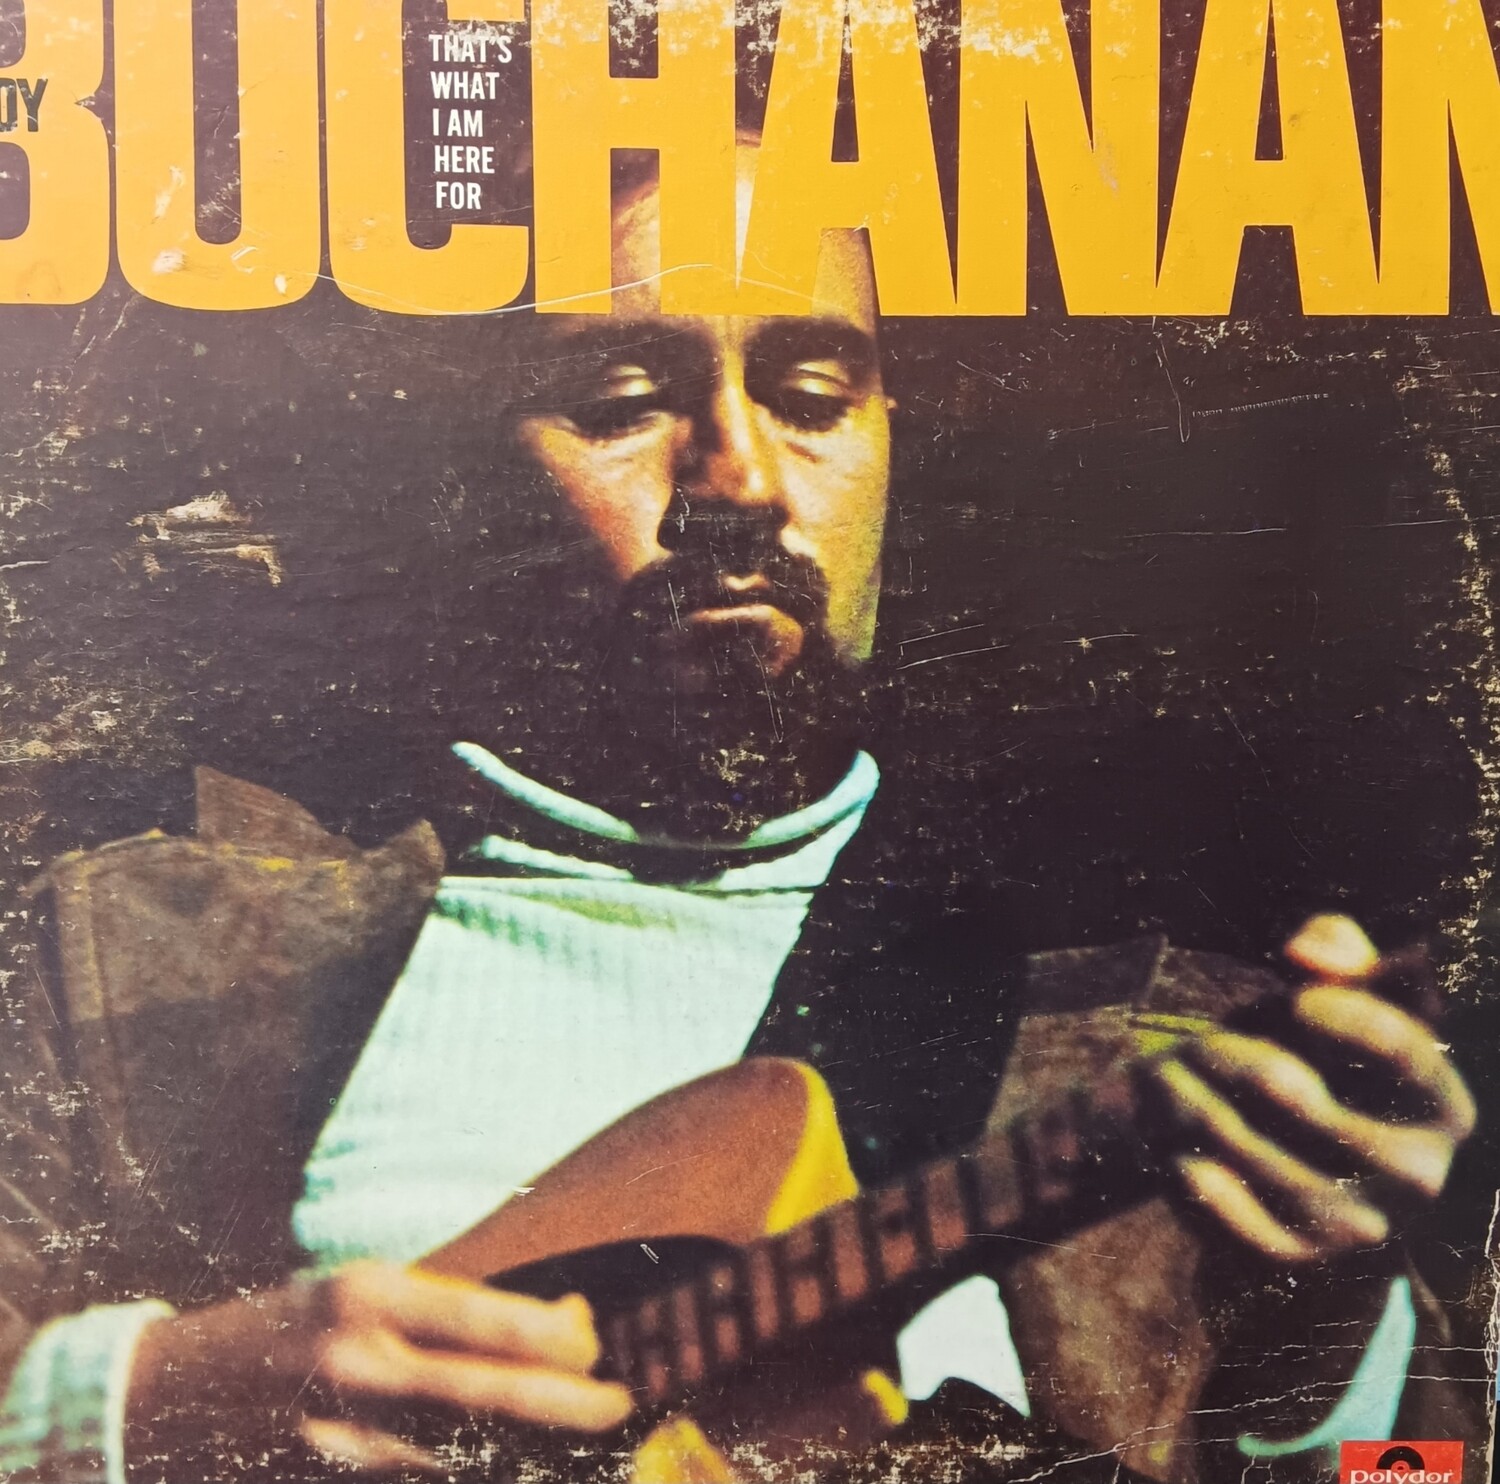 ROY BUCHANAN - That's what I am here for